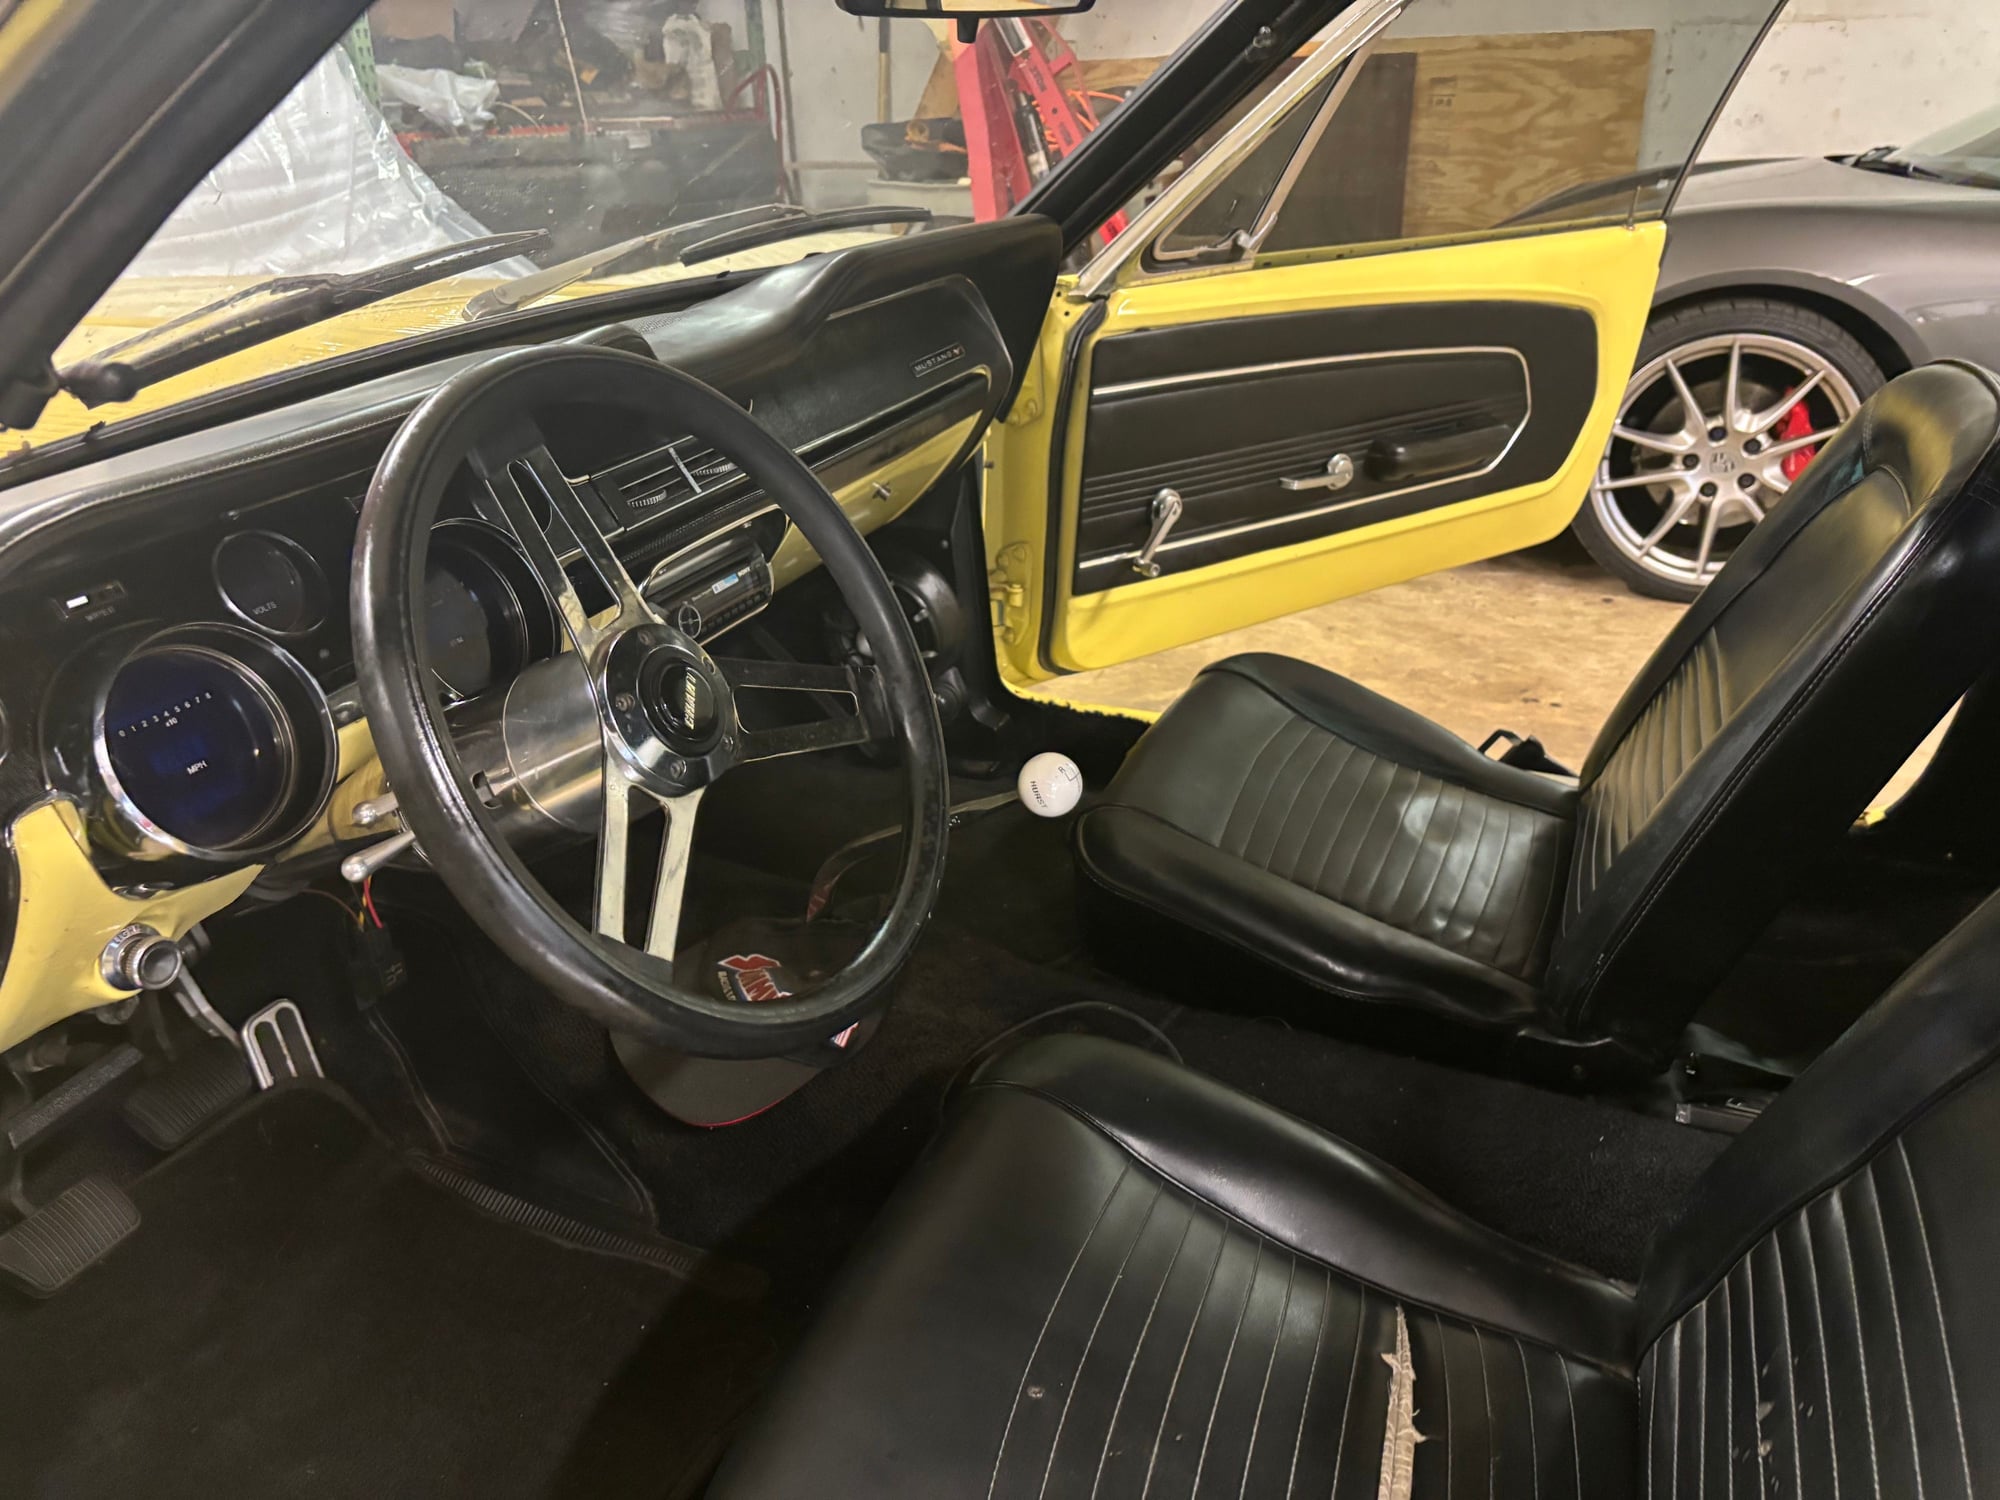 1967 Ford Mustang - 1967 Ford Mustang Coupe - Used - VIN 7T01T154660 - 20,000 Miles - 8 cyl - 2WD - Manual - Coupe - Yellow - Newburg, MD 20664, United States